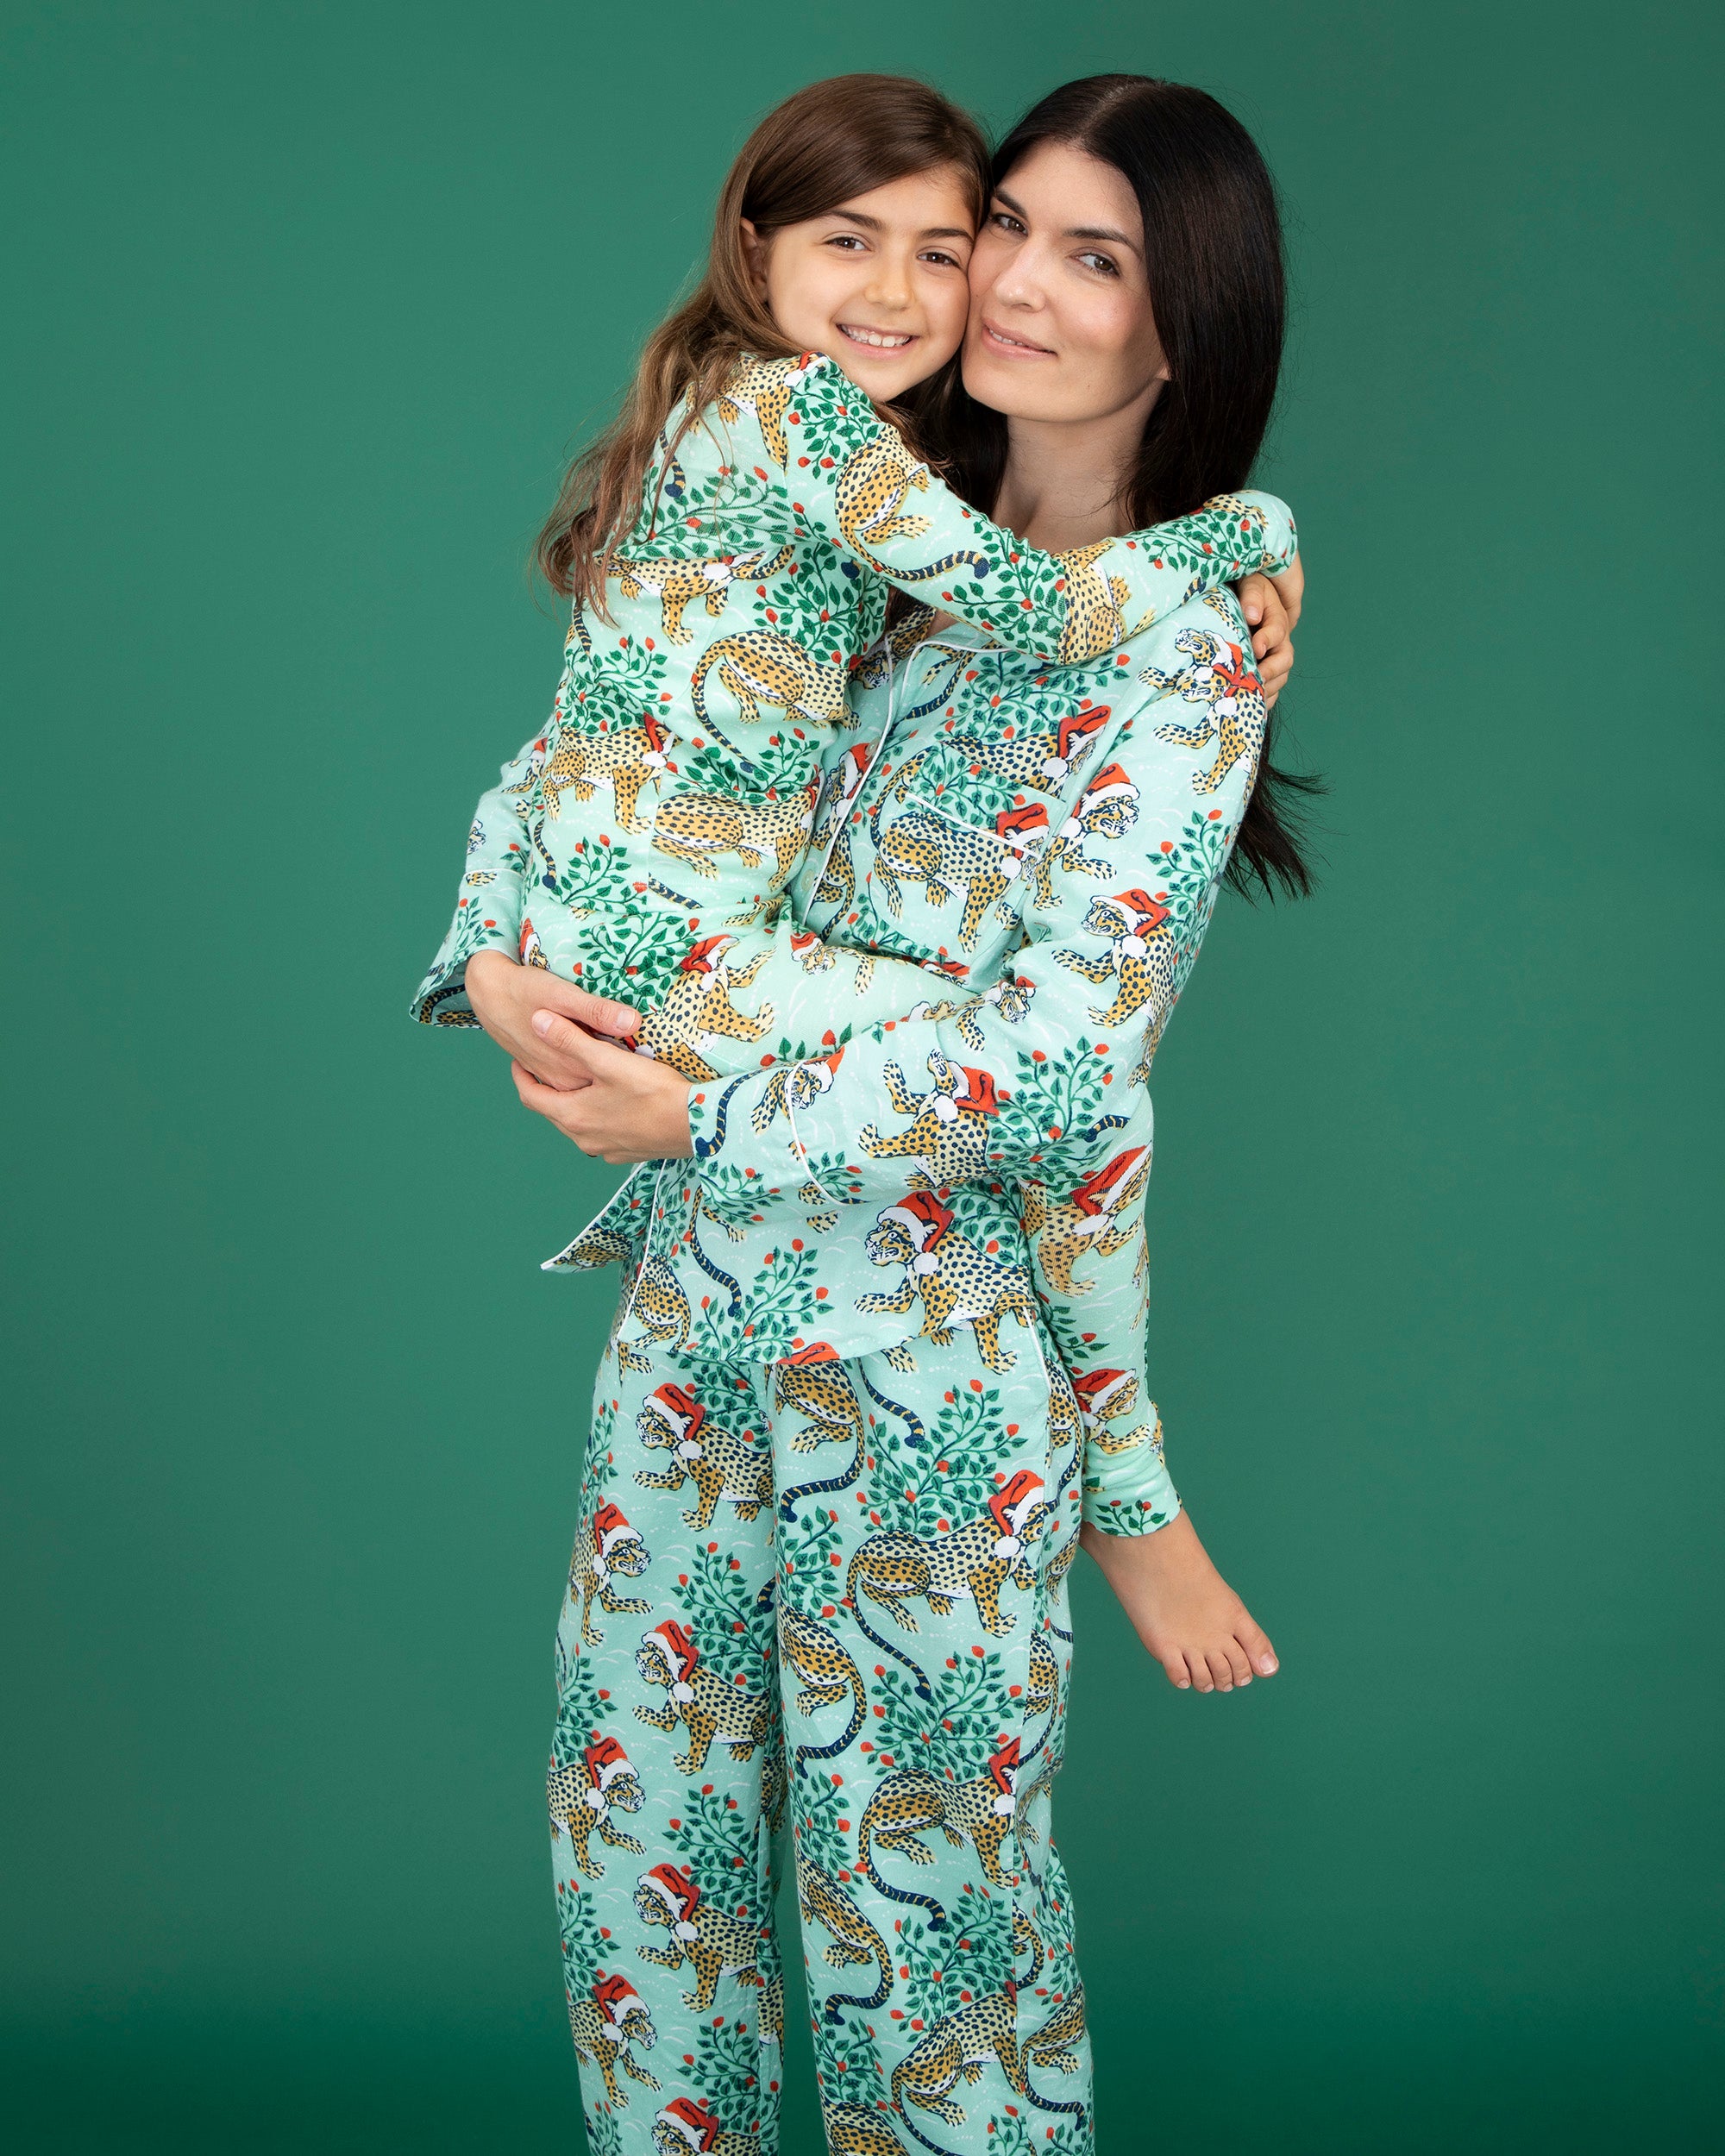 Holly Jolly Bagheera - Tall Flannel Long Sleep Set - Frosted Mint - Printfresh